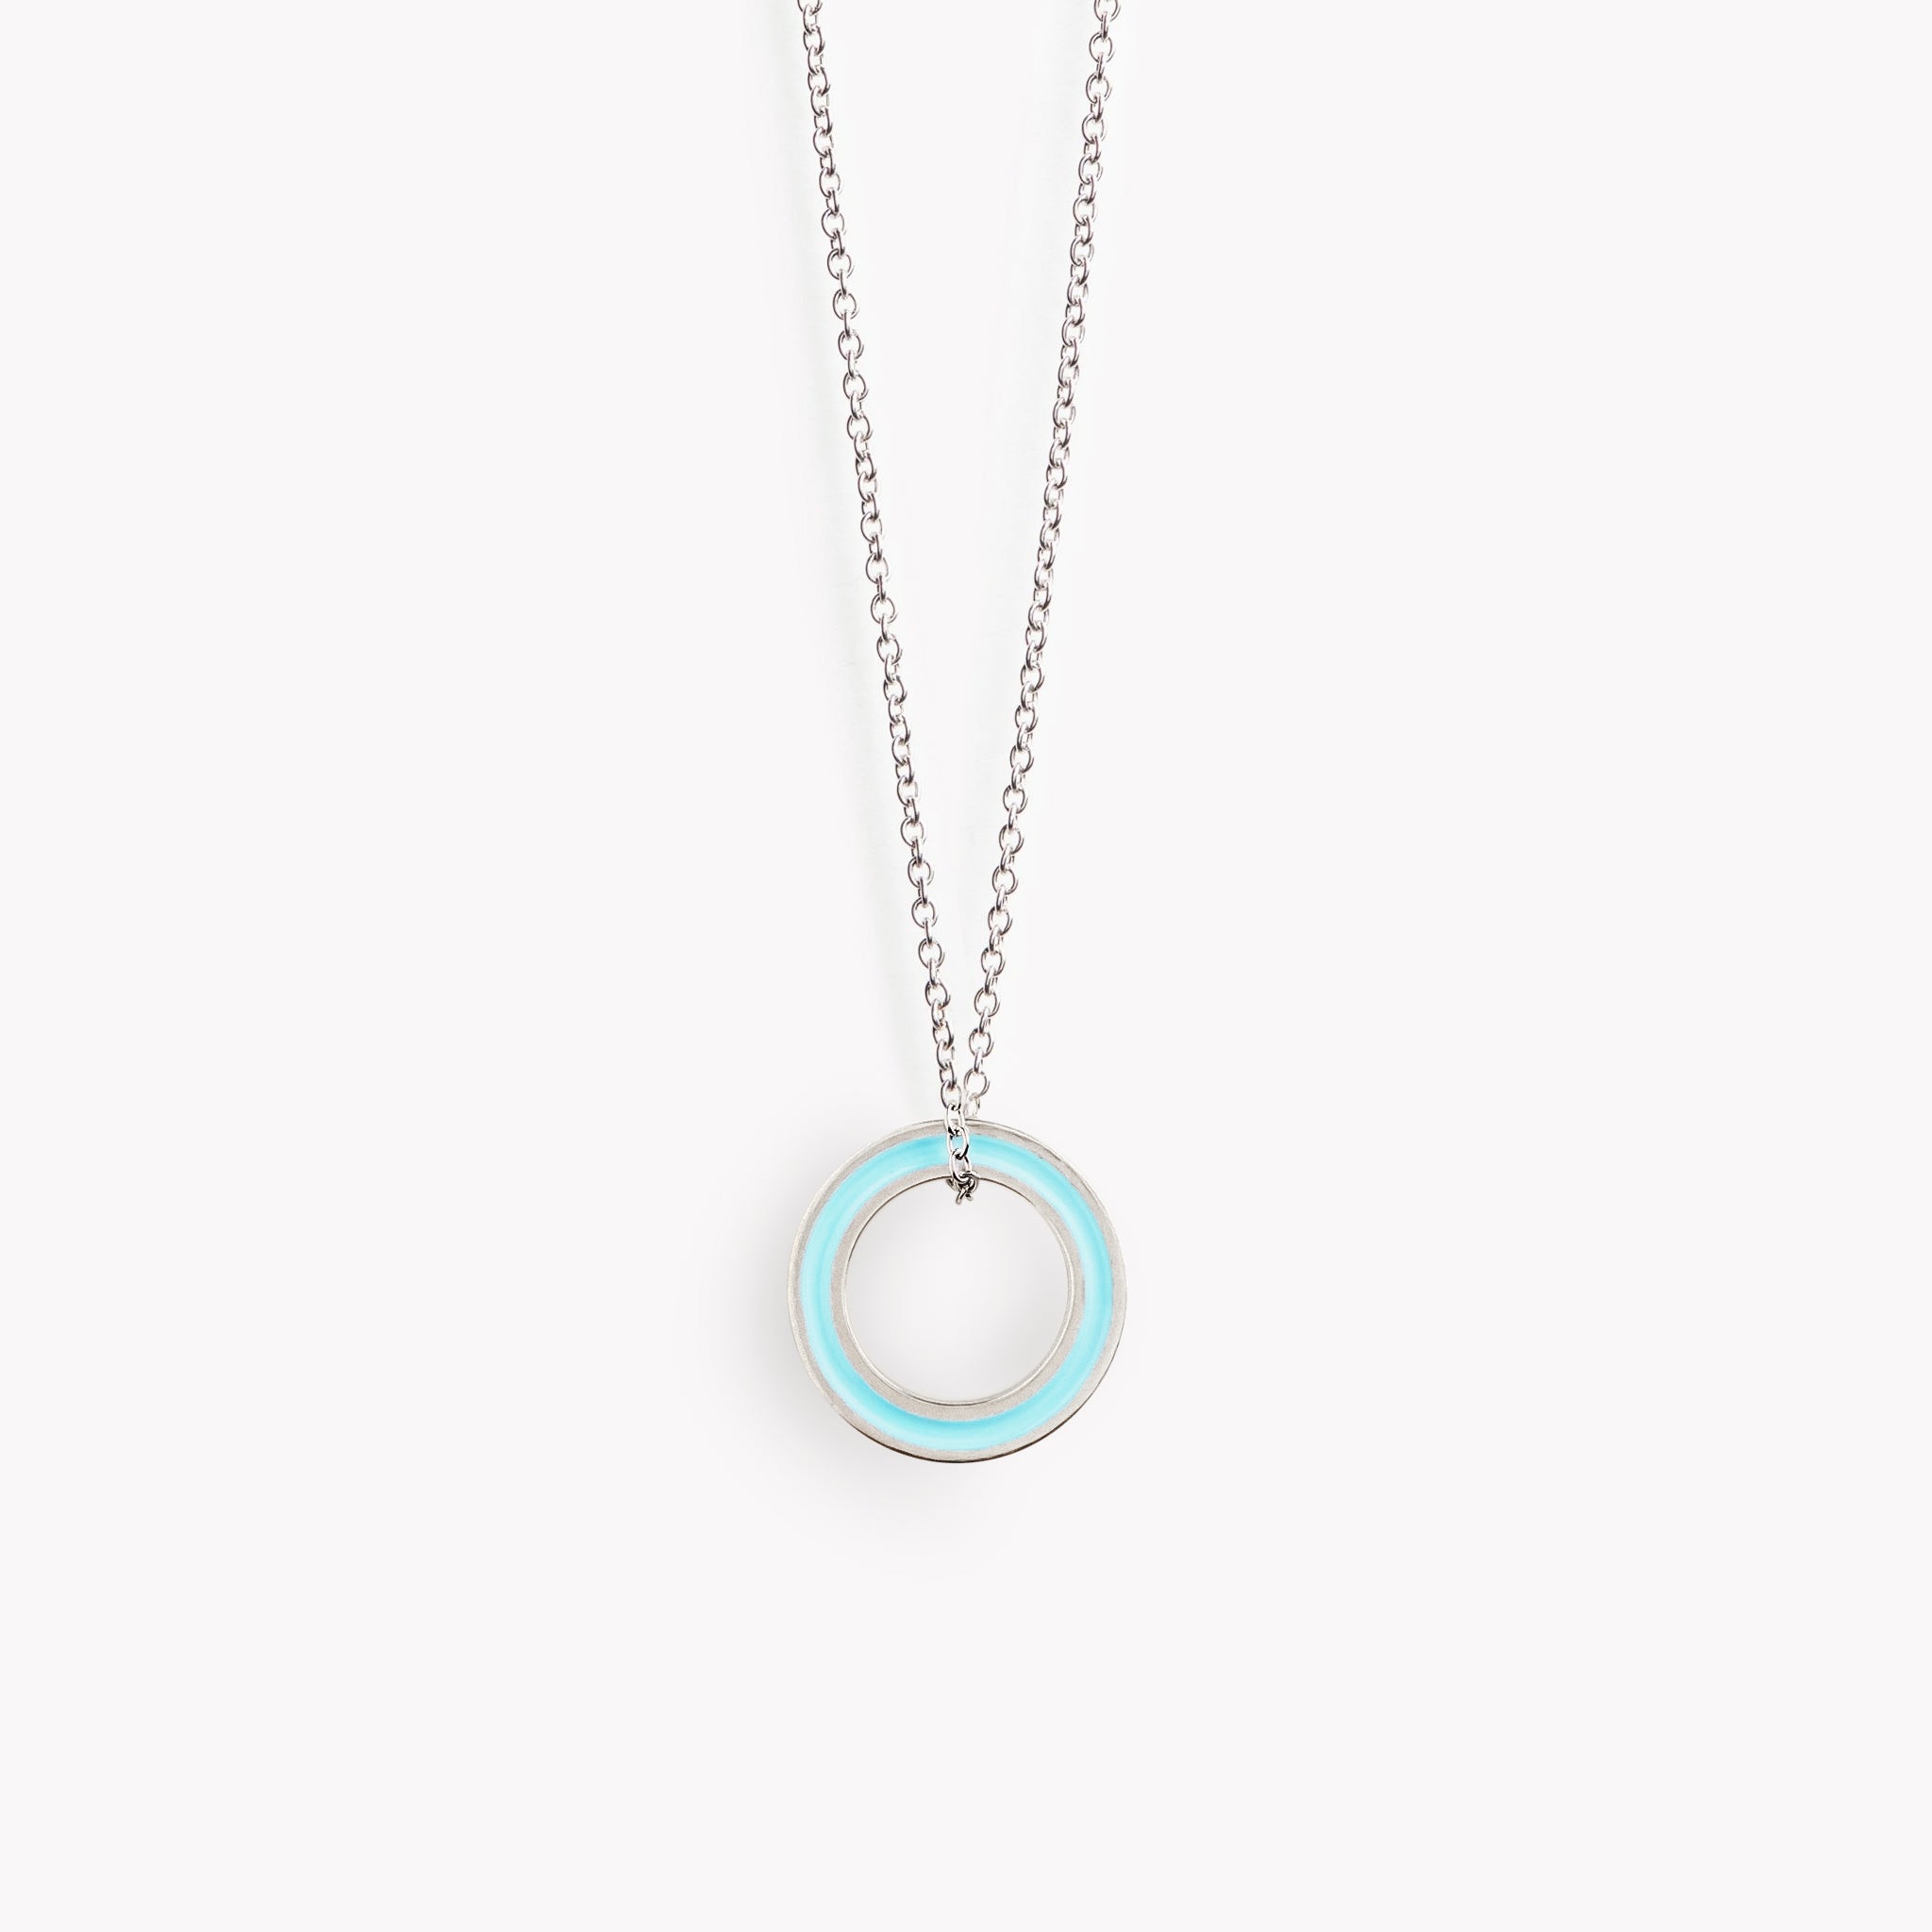 A simple turquoise circular necklace on a fine steel trace chain.